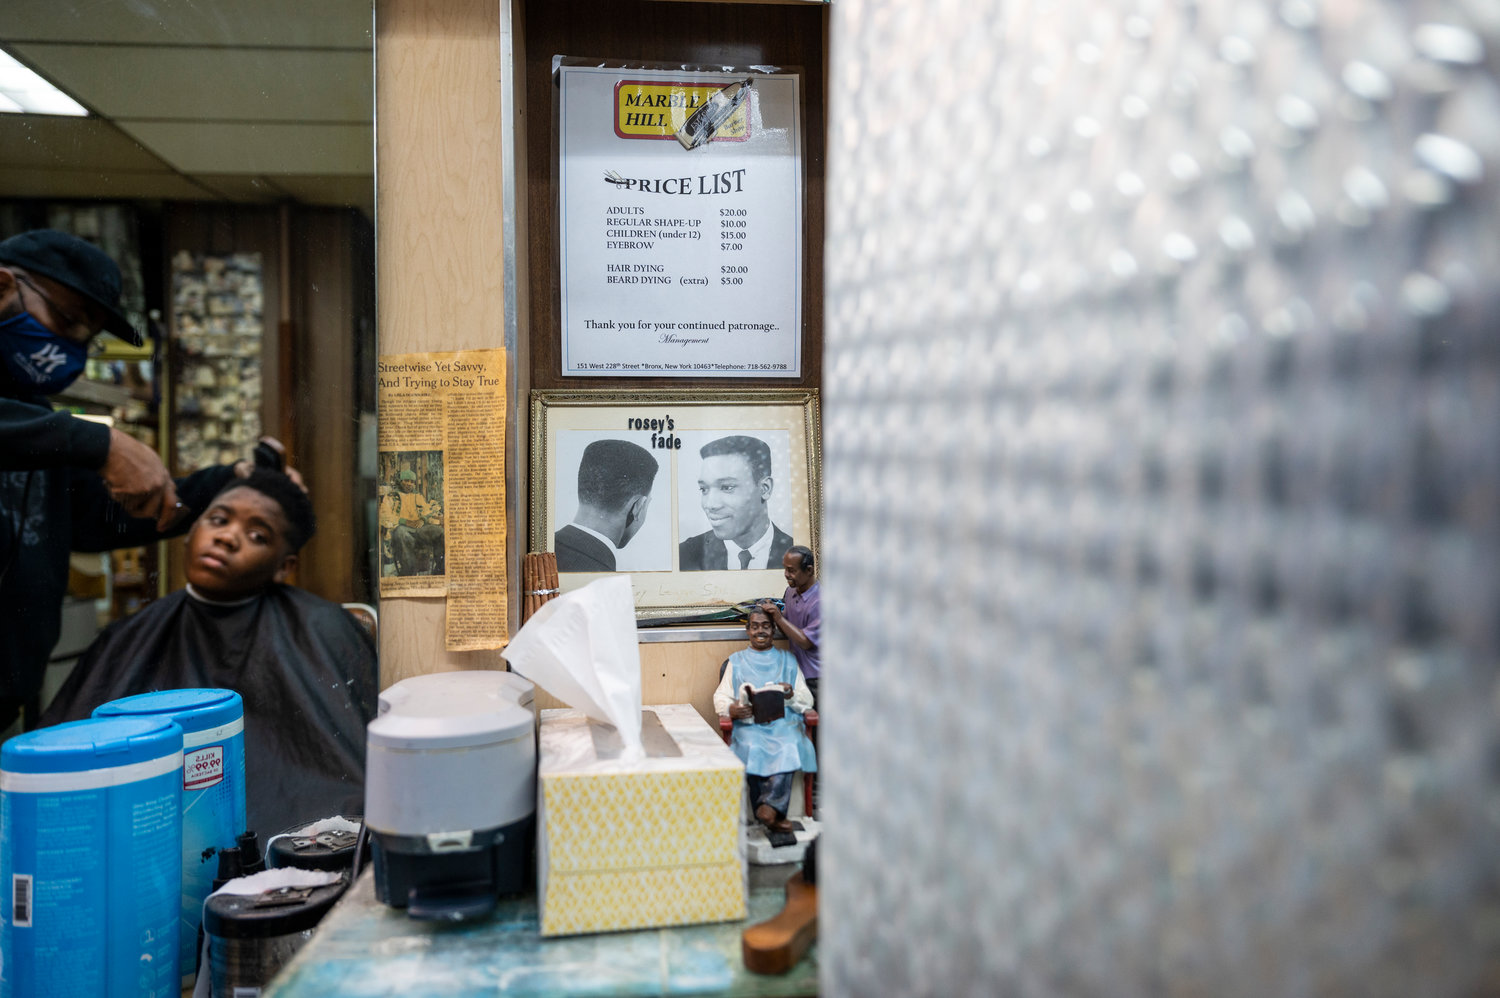 Rosey’s Barber Shop, an informal name for Marble Hill’s International Unisex Salon, has served the northern Manhattan neighborhood for nearly 60 years. Neighbors consider its owner, Roosevelt Spivey, a cherished member of the community. When Rosey’s landlord tried to raise his rent last year, that same community rallied around him, helping him fight to keep his shop.